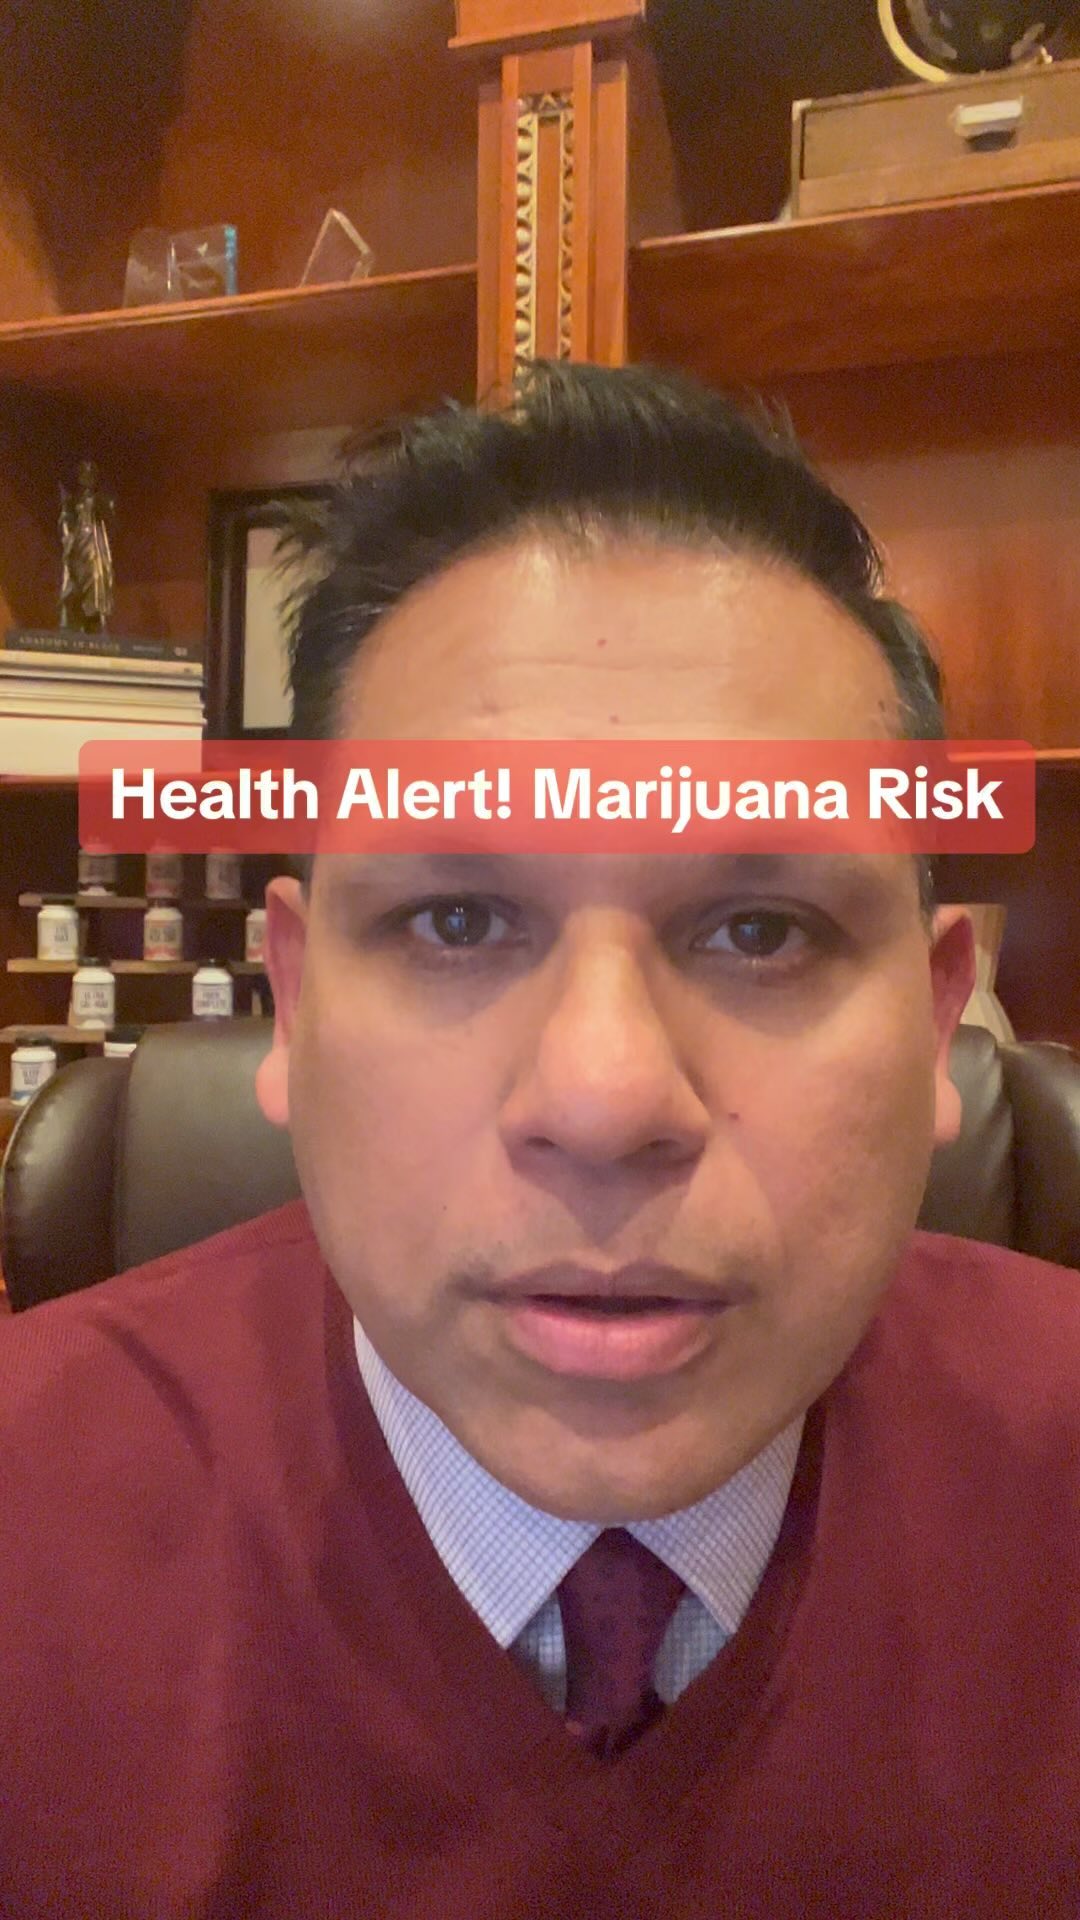 Health Alert, new research suggests that using marijuana may significantly increase the chance of experiencing heart attacks and strokes. This risk remained high even for people without previous heart conditions or who had never smoked or vaped tobacco products.  Here with more details is our Chief Health Editor, Dr. Partha Nandi.  Dr. Nandi, people can smoke, vape or eat cannabis products, did the method matter, and how much did the risk increase?
 
It did not matter whether individuals smoked, ate, or vaped cannabis.  But interestingly, 74% of the participants in the study preferred smoking. Of those, 4% were daily users, and 7% used marijuana less than daily.
 
Now, this study was published in the Journal of the American Heart Association.  Researchers analyzed survey data from more than 430,000 adults over four years.  And what they found, was the risk of heart attack and stroke was much higher for cannabis users compared to non-users.  Breaking it down, daily marijuana use was linked to a 42% higher stroke risk and a 25% higher risk of a heart attack.  The study also found the more frequently people used marijuana, the higher the risk climbed. 
 
And here’s something younger people need to be aware of.  The risks of stroke and heart attack aren’t just limited to older adults.  This study included people between the ages of 18 and 74.  And men under the age of 55 and women under the age of 65, cannabis use was linked with a 36% higher risk of coronary heart disease, heart attack, and stroke.  More info in the comments #marijuana @american_heart #healthalert